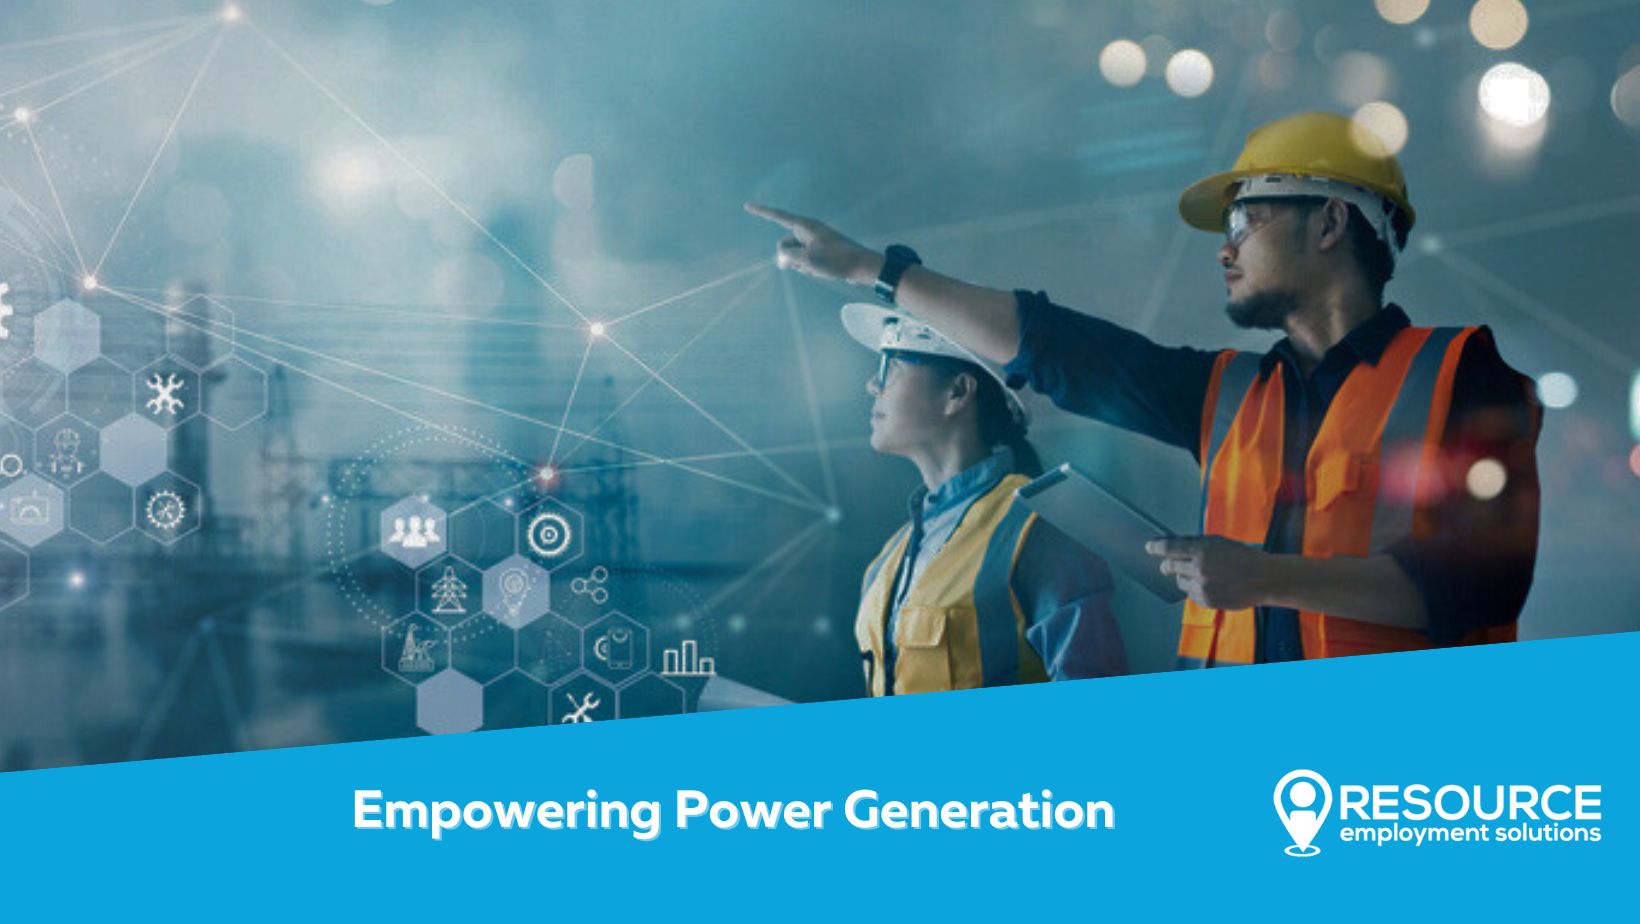 Empowering Power Generation: Partnering with Resource Employment Solutions